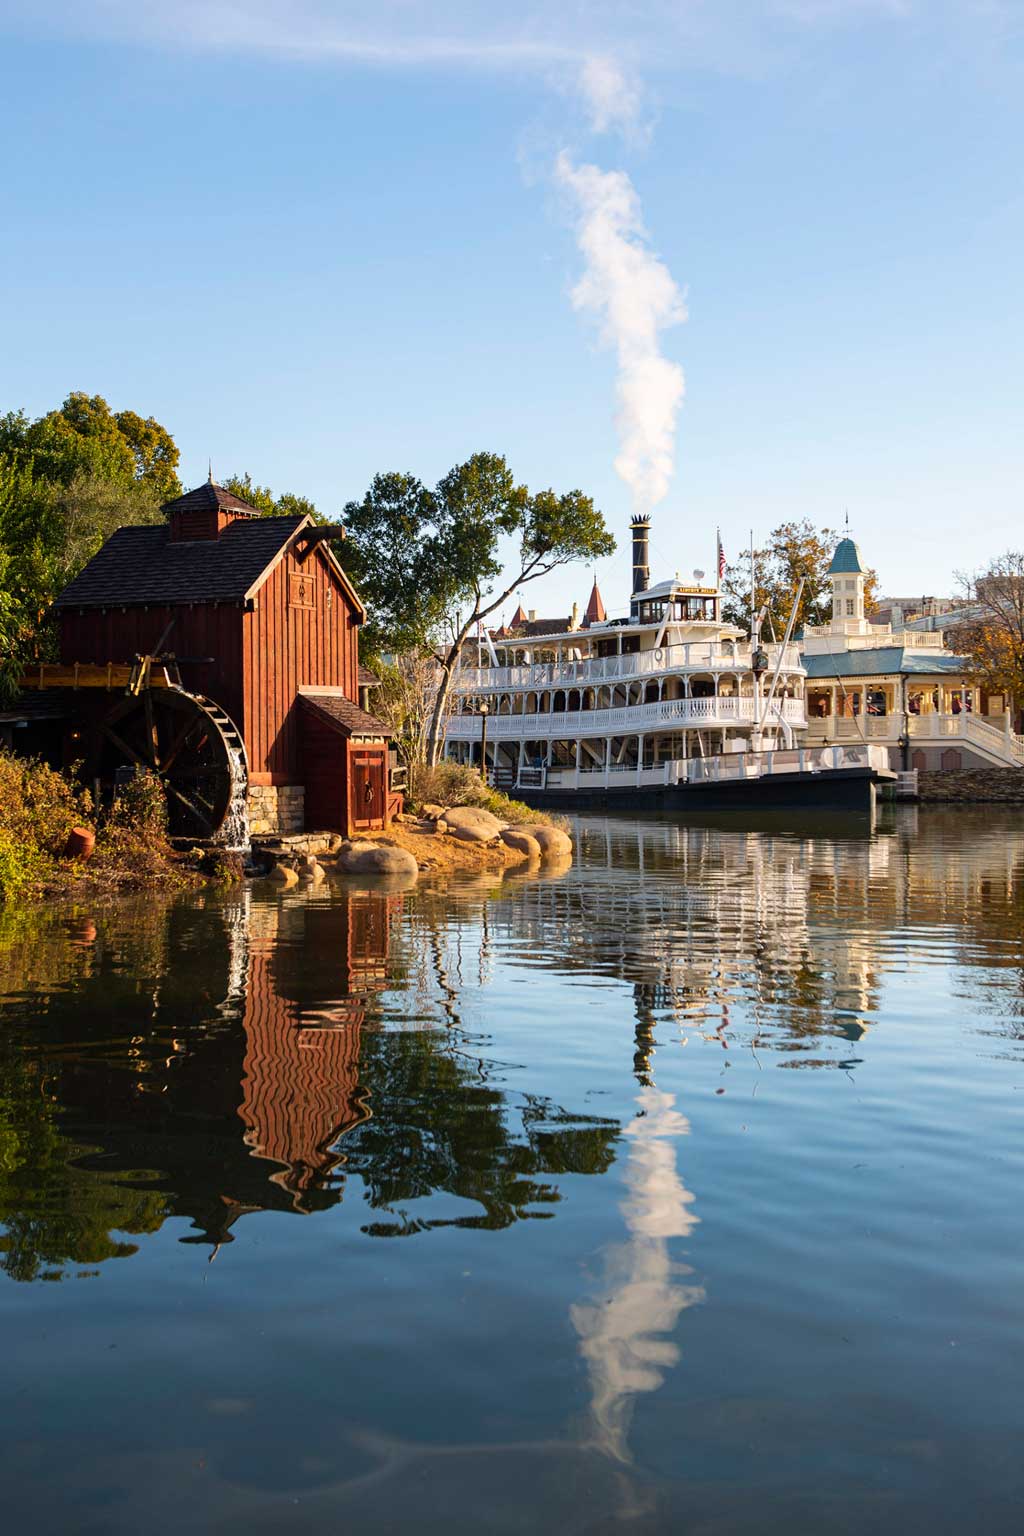 The Liberty Belle riverboat returns to its dock in Liberty Square, following a four-month scheduled refurbishment of Rivers of America in Magic Kingdom Park at Walt Disney World Resort in Lake Buena Vista, Fla. While cast members replaced her underwater track and updated sections of the surrounding areas, the boat was sent to a temporary dry dock. (David Roark, photographer)